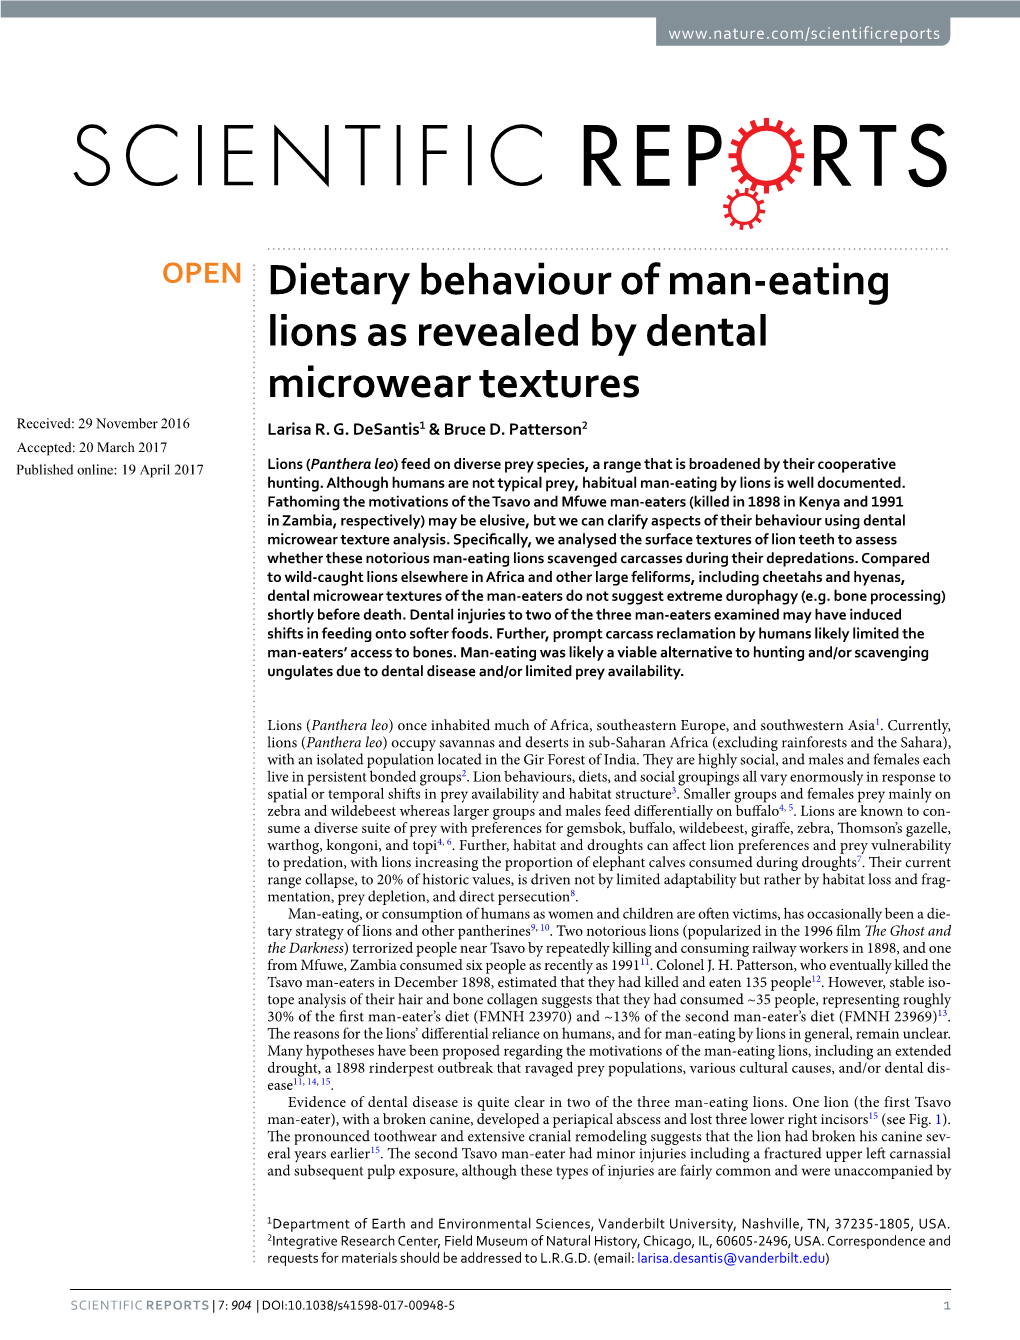 Dietary Behaviour of Man-Eating Lions As Revealed by Dental Microwear Textures Received: 29 November 2016 Larisa R